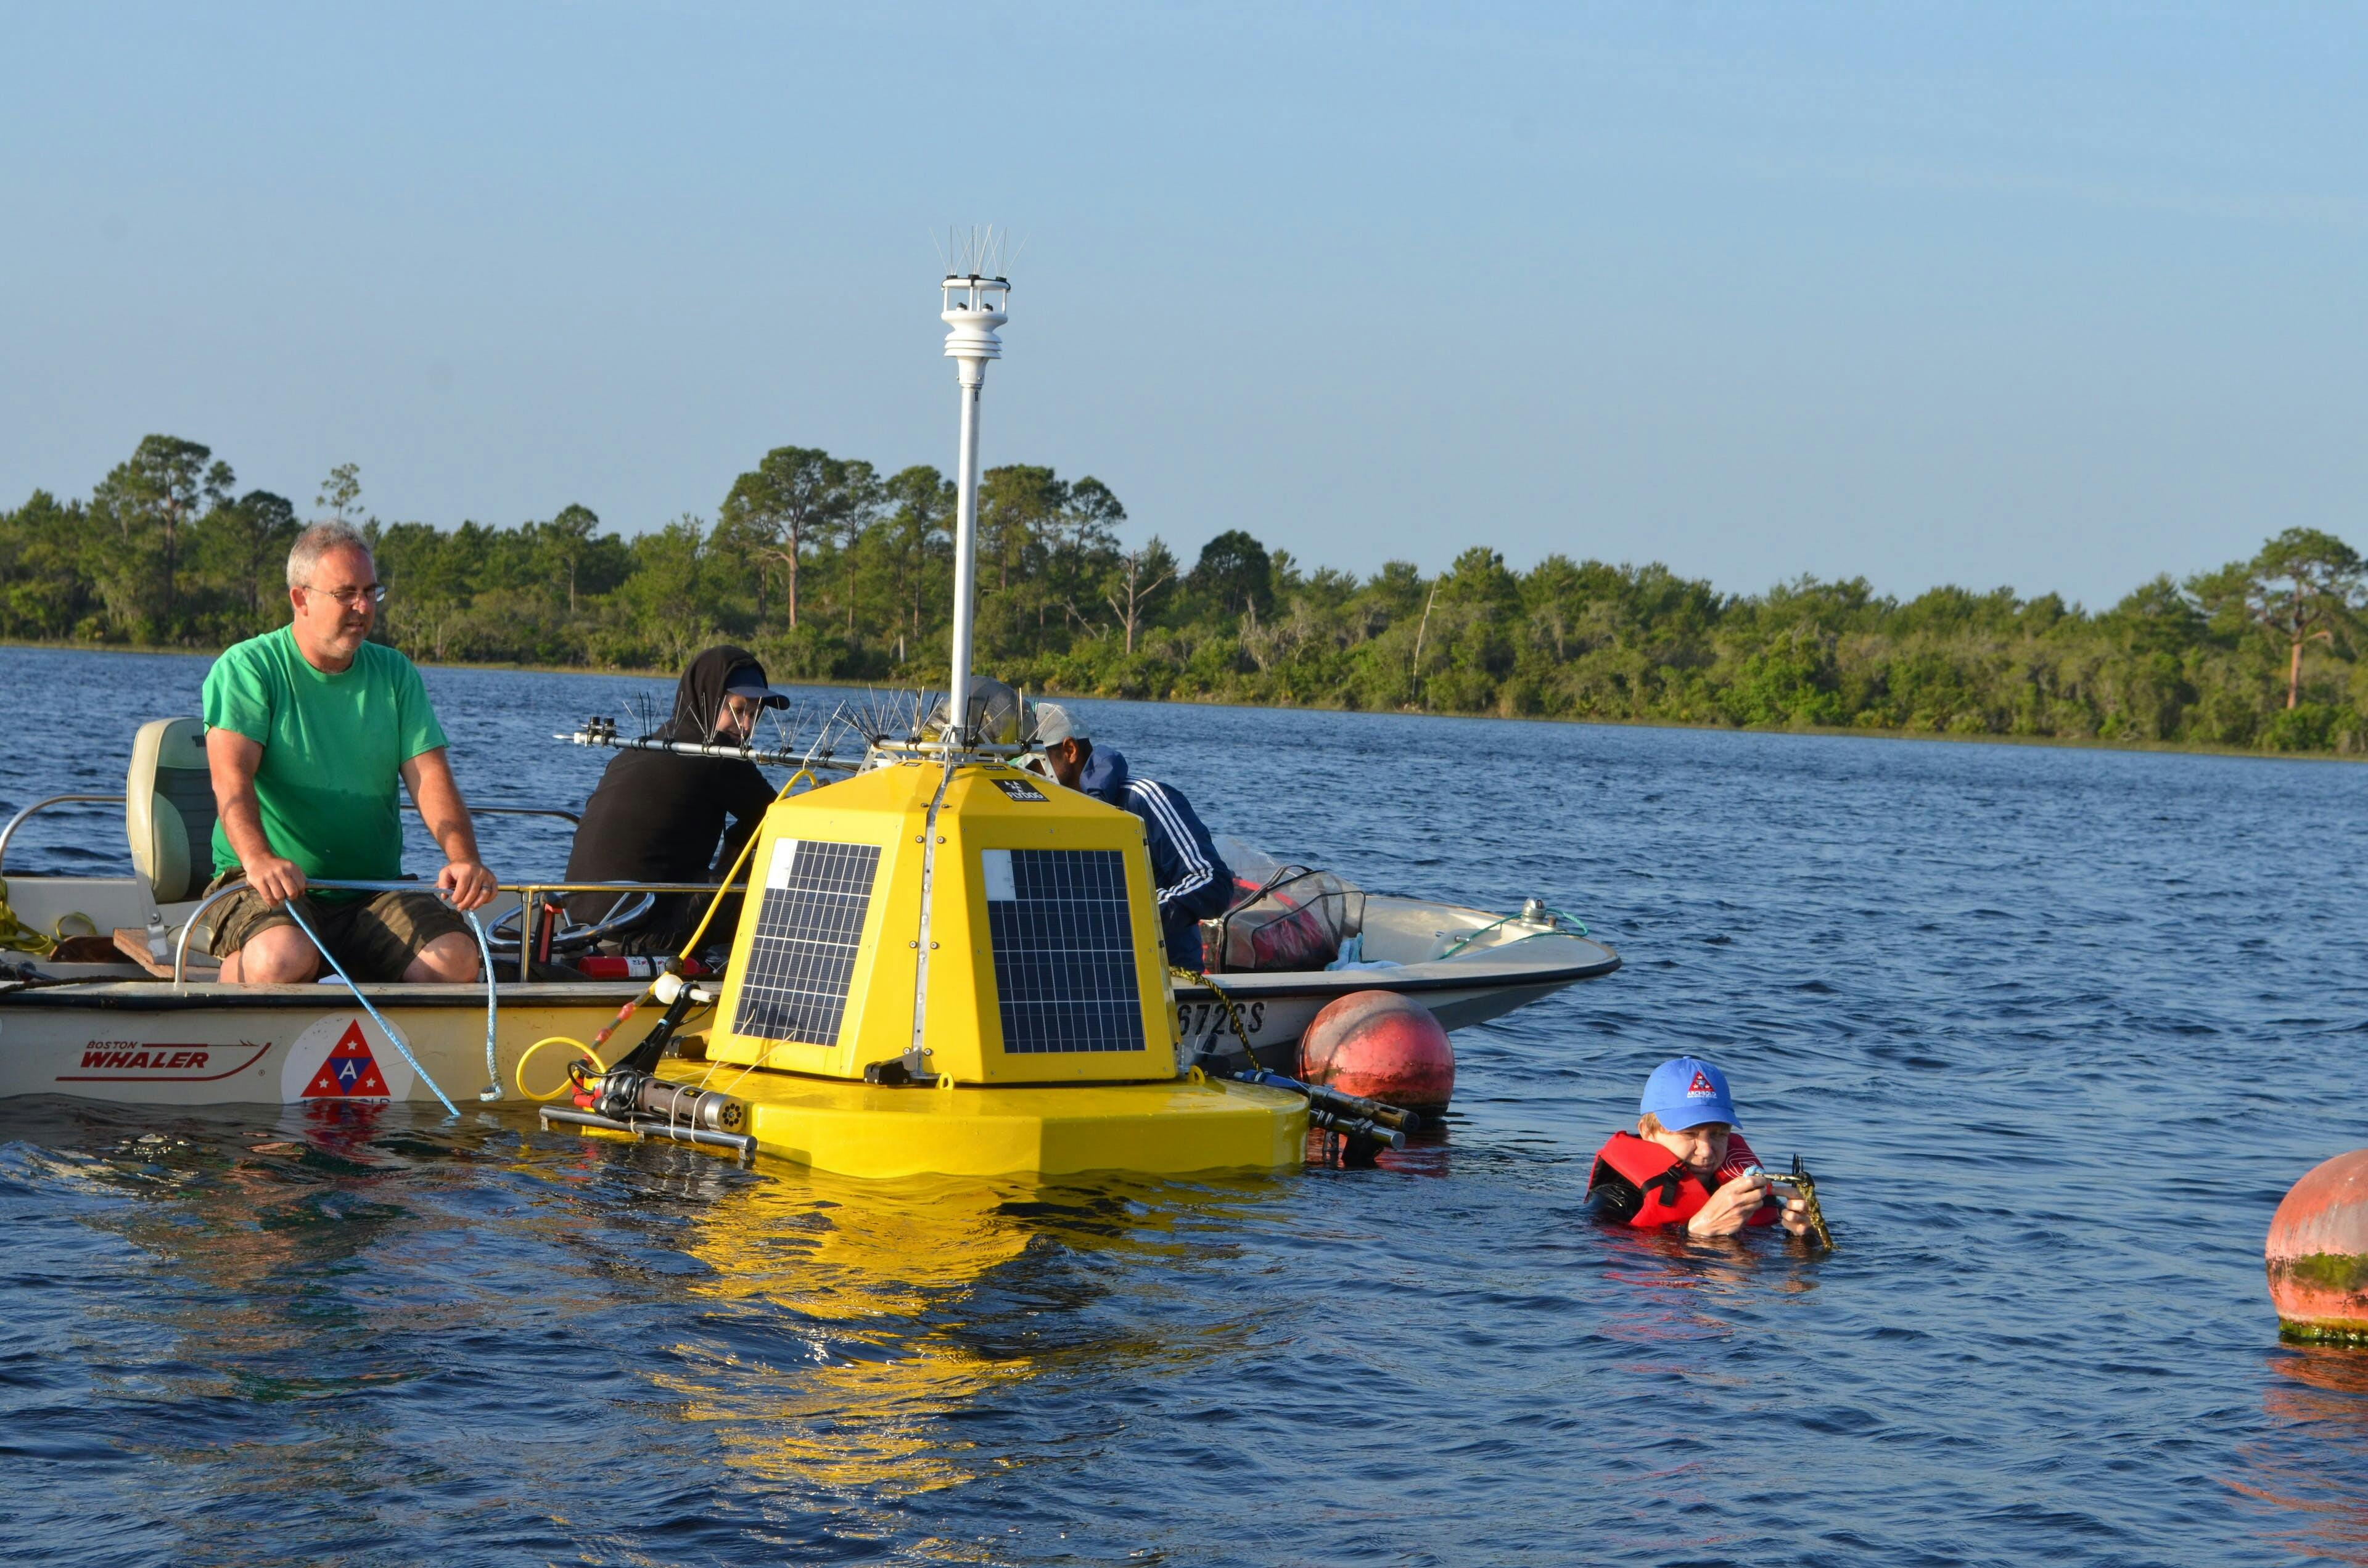 Kevin Main Dr. Amartya Saha (Archbold), Andri Laidre (Flydog) and in the water Dr. Evelyn Gaiser (FIU) deploying buoy in Lake Annie, April 1-2, 2022. Photo by Gabe Kamener (FIU).